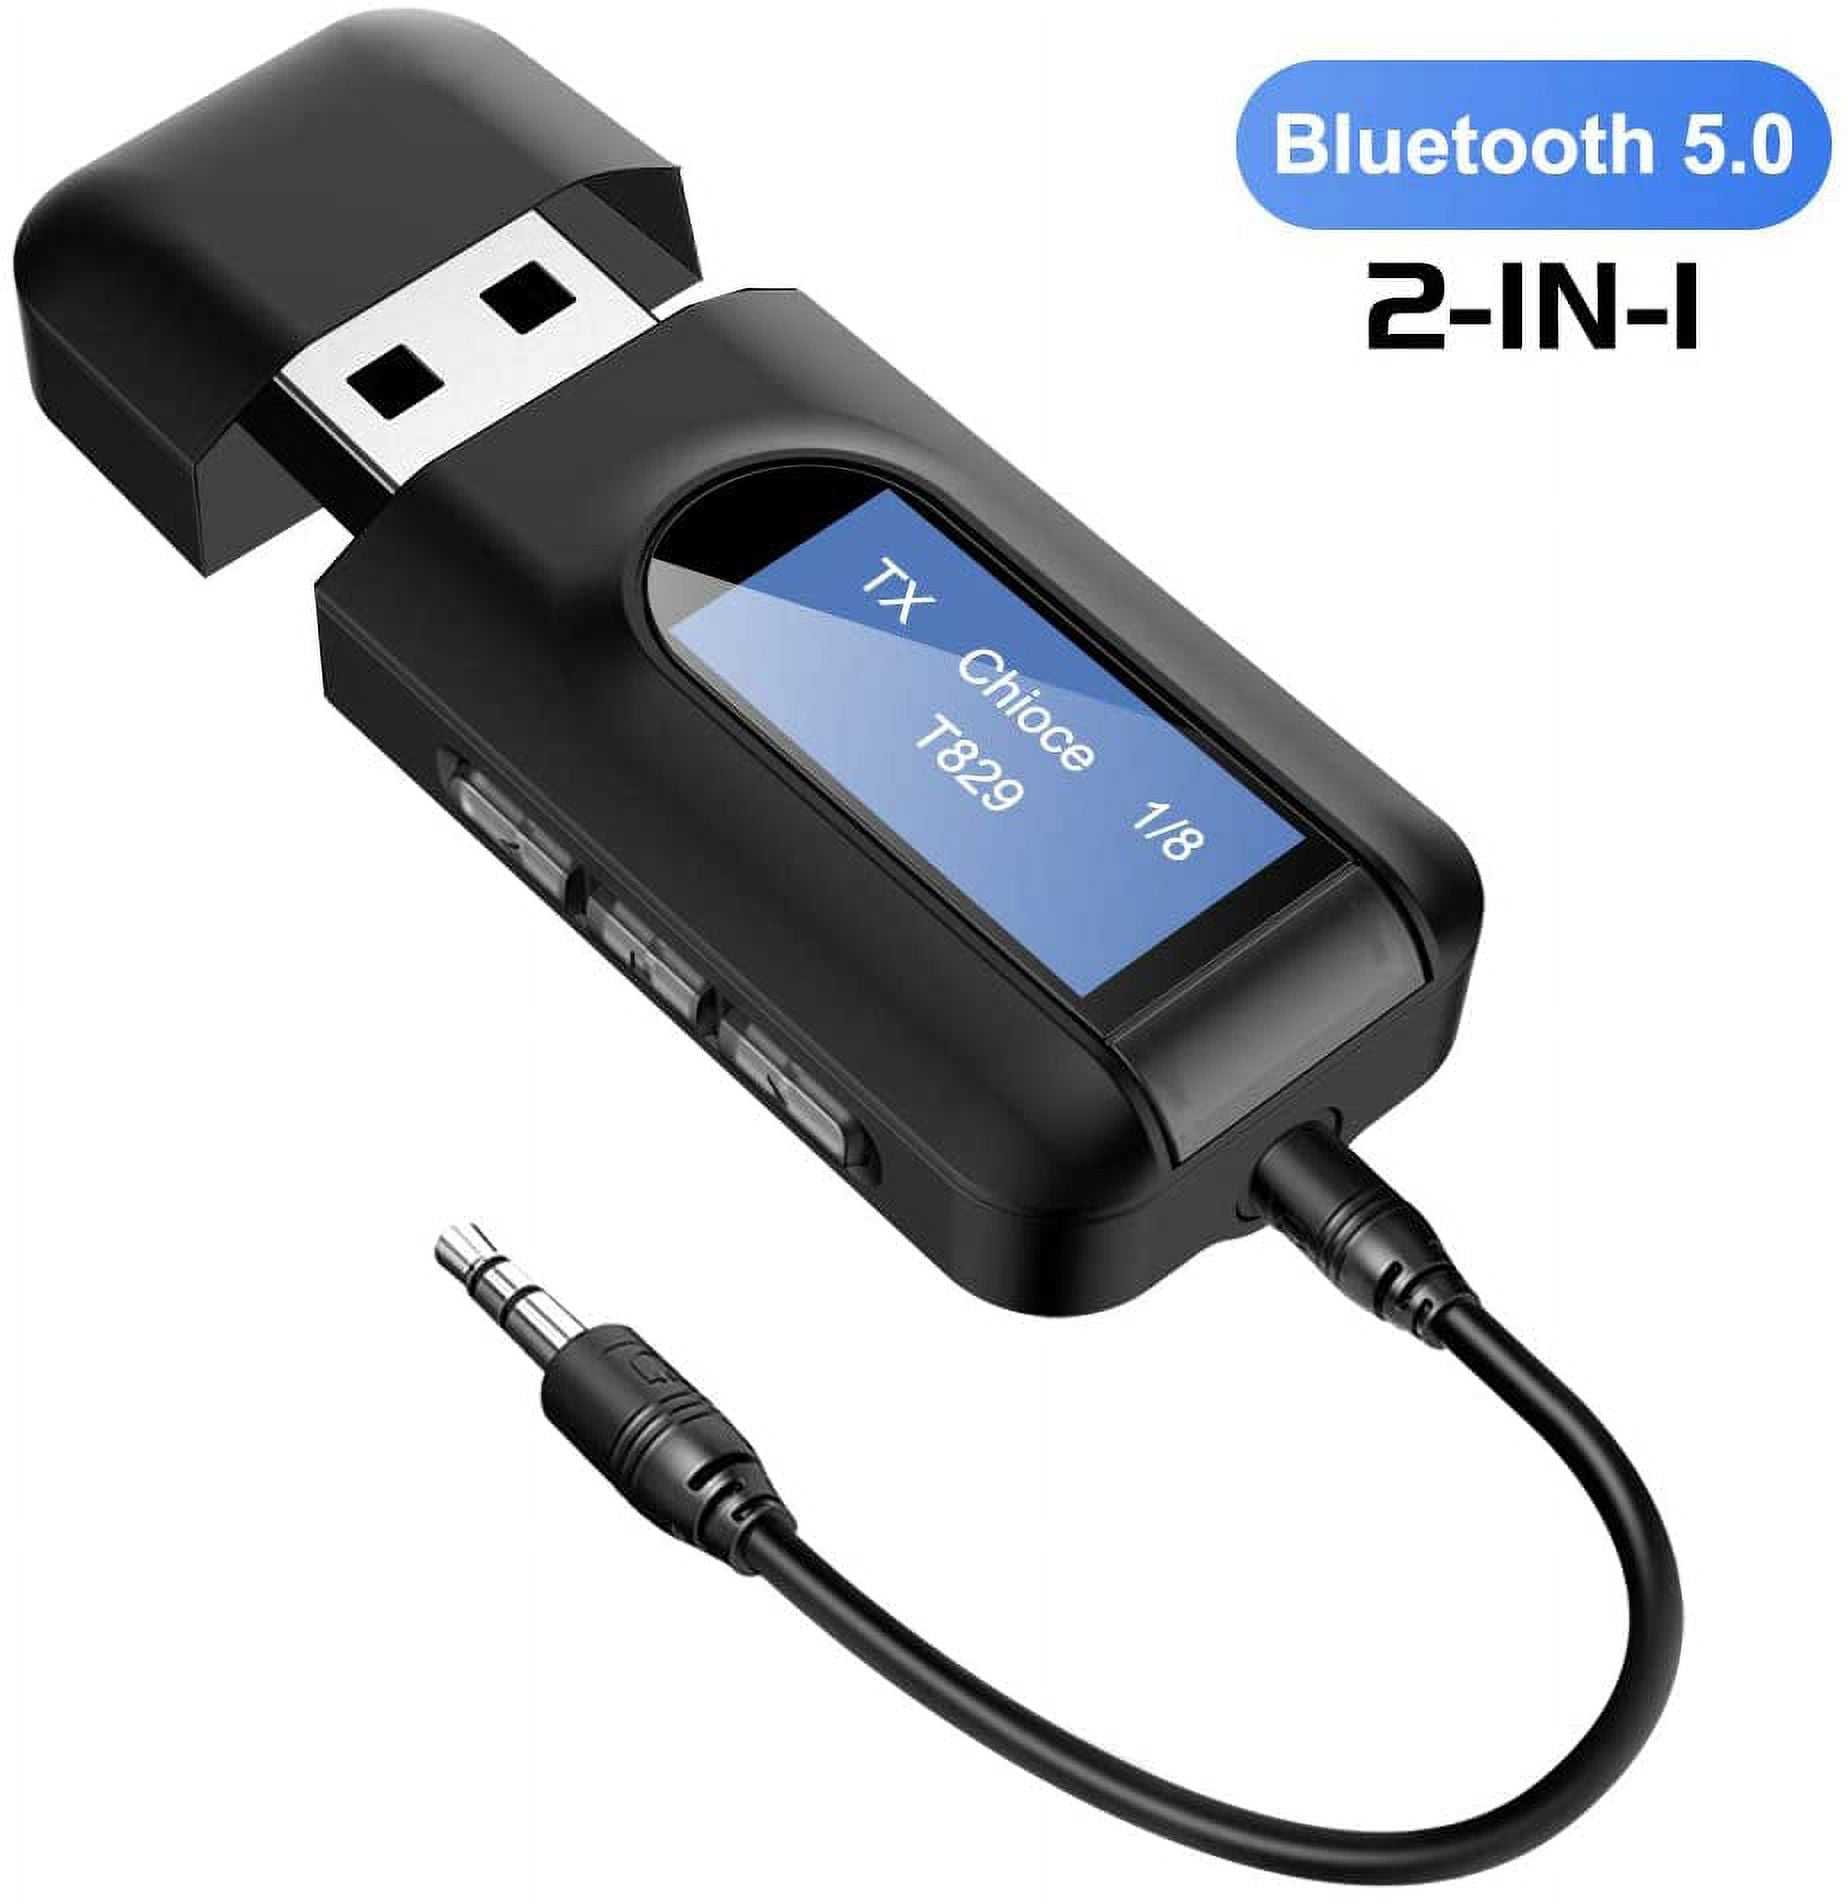  JIMTAB USB Bluetooth Adapter,Bluetooth 5.0 Transmitter Receiver  2 in 1 Wireless Bluetooth Converter Built-in 2 3.5mm Audio Bluetooth for  TV, Home Stereo, Car Stereo, Headphones, Speakers, PC : Electronics